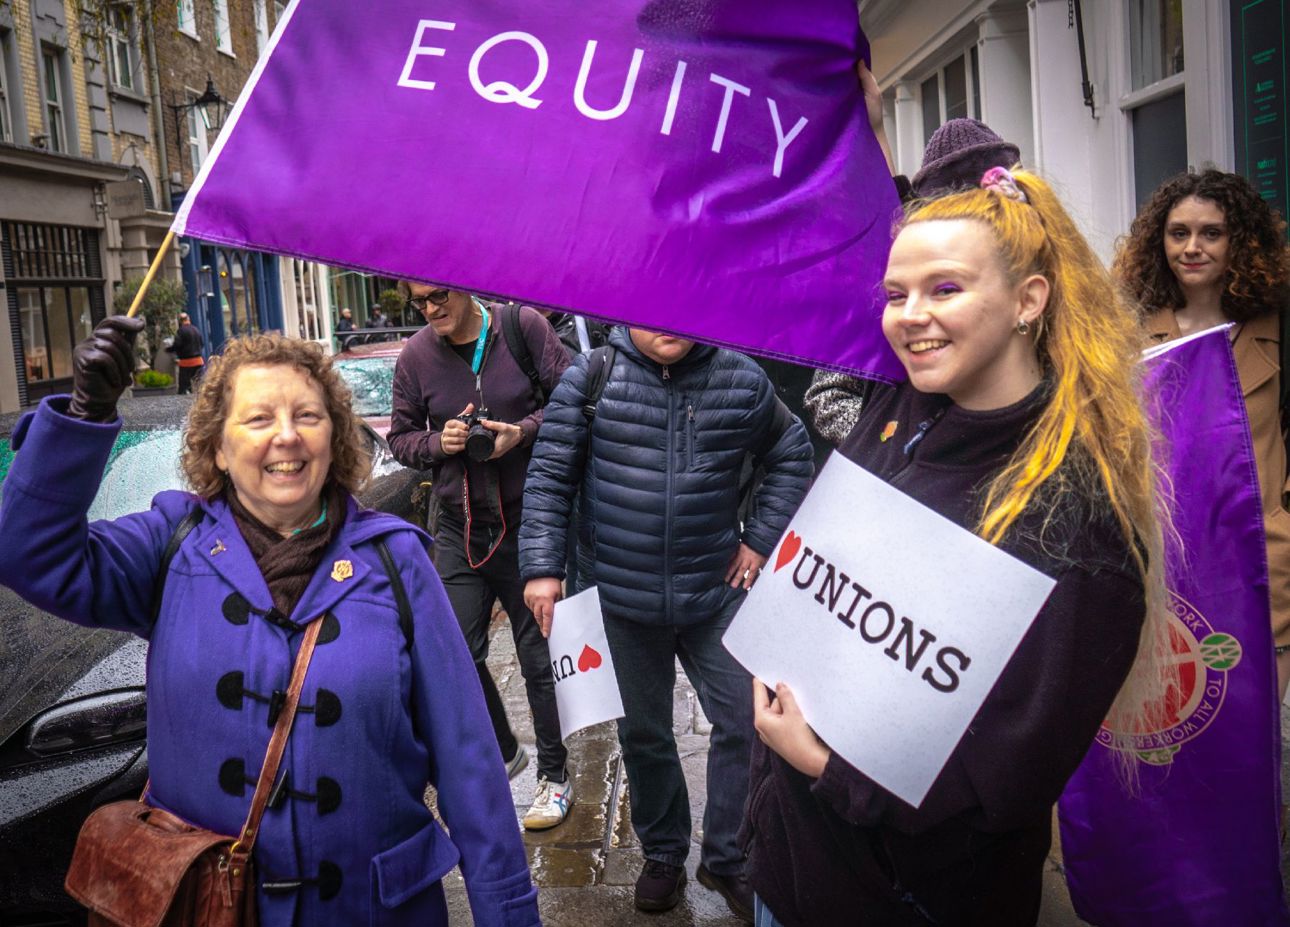 Su Gilroy and Amanda Grace pose with an Equity flag and an I Heart Unions sign during the Culture Tour across London.